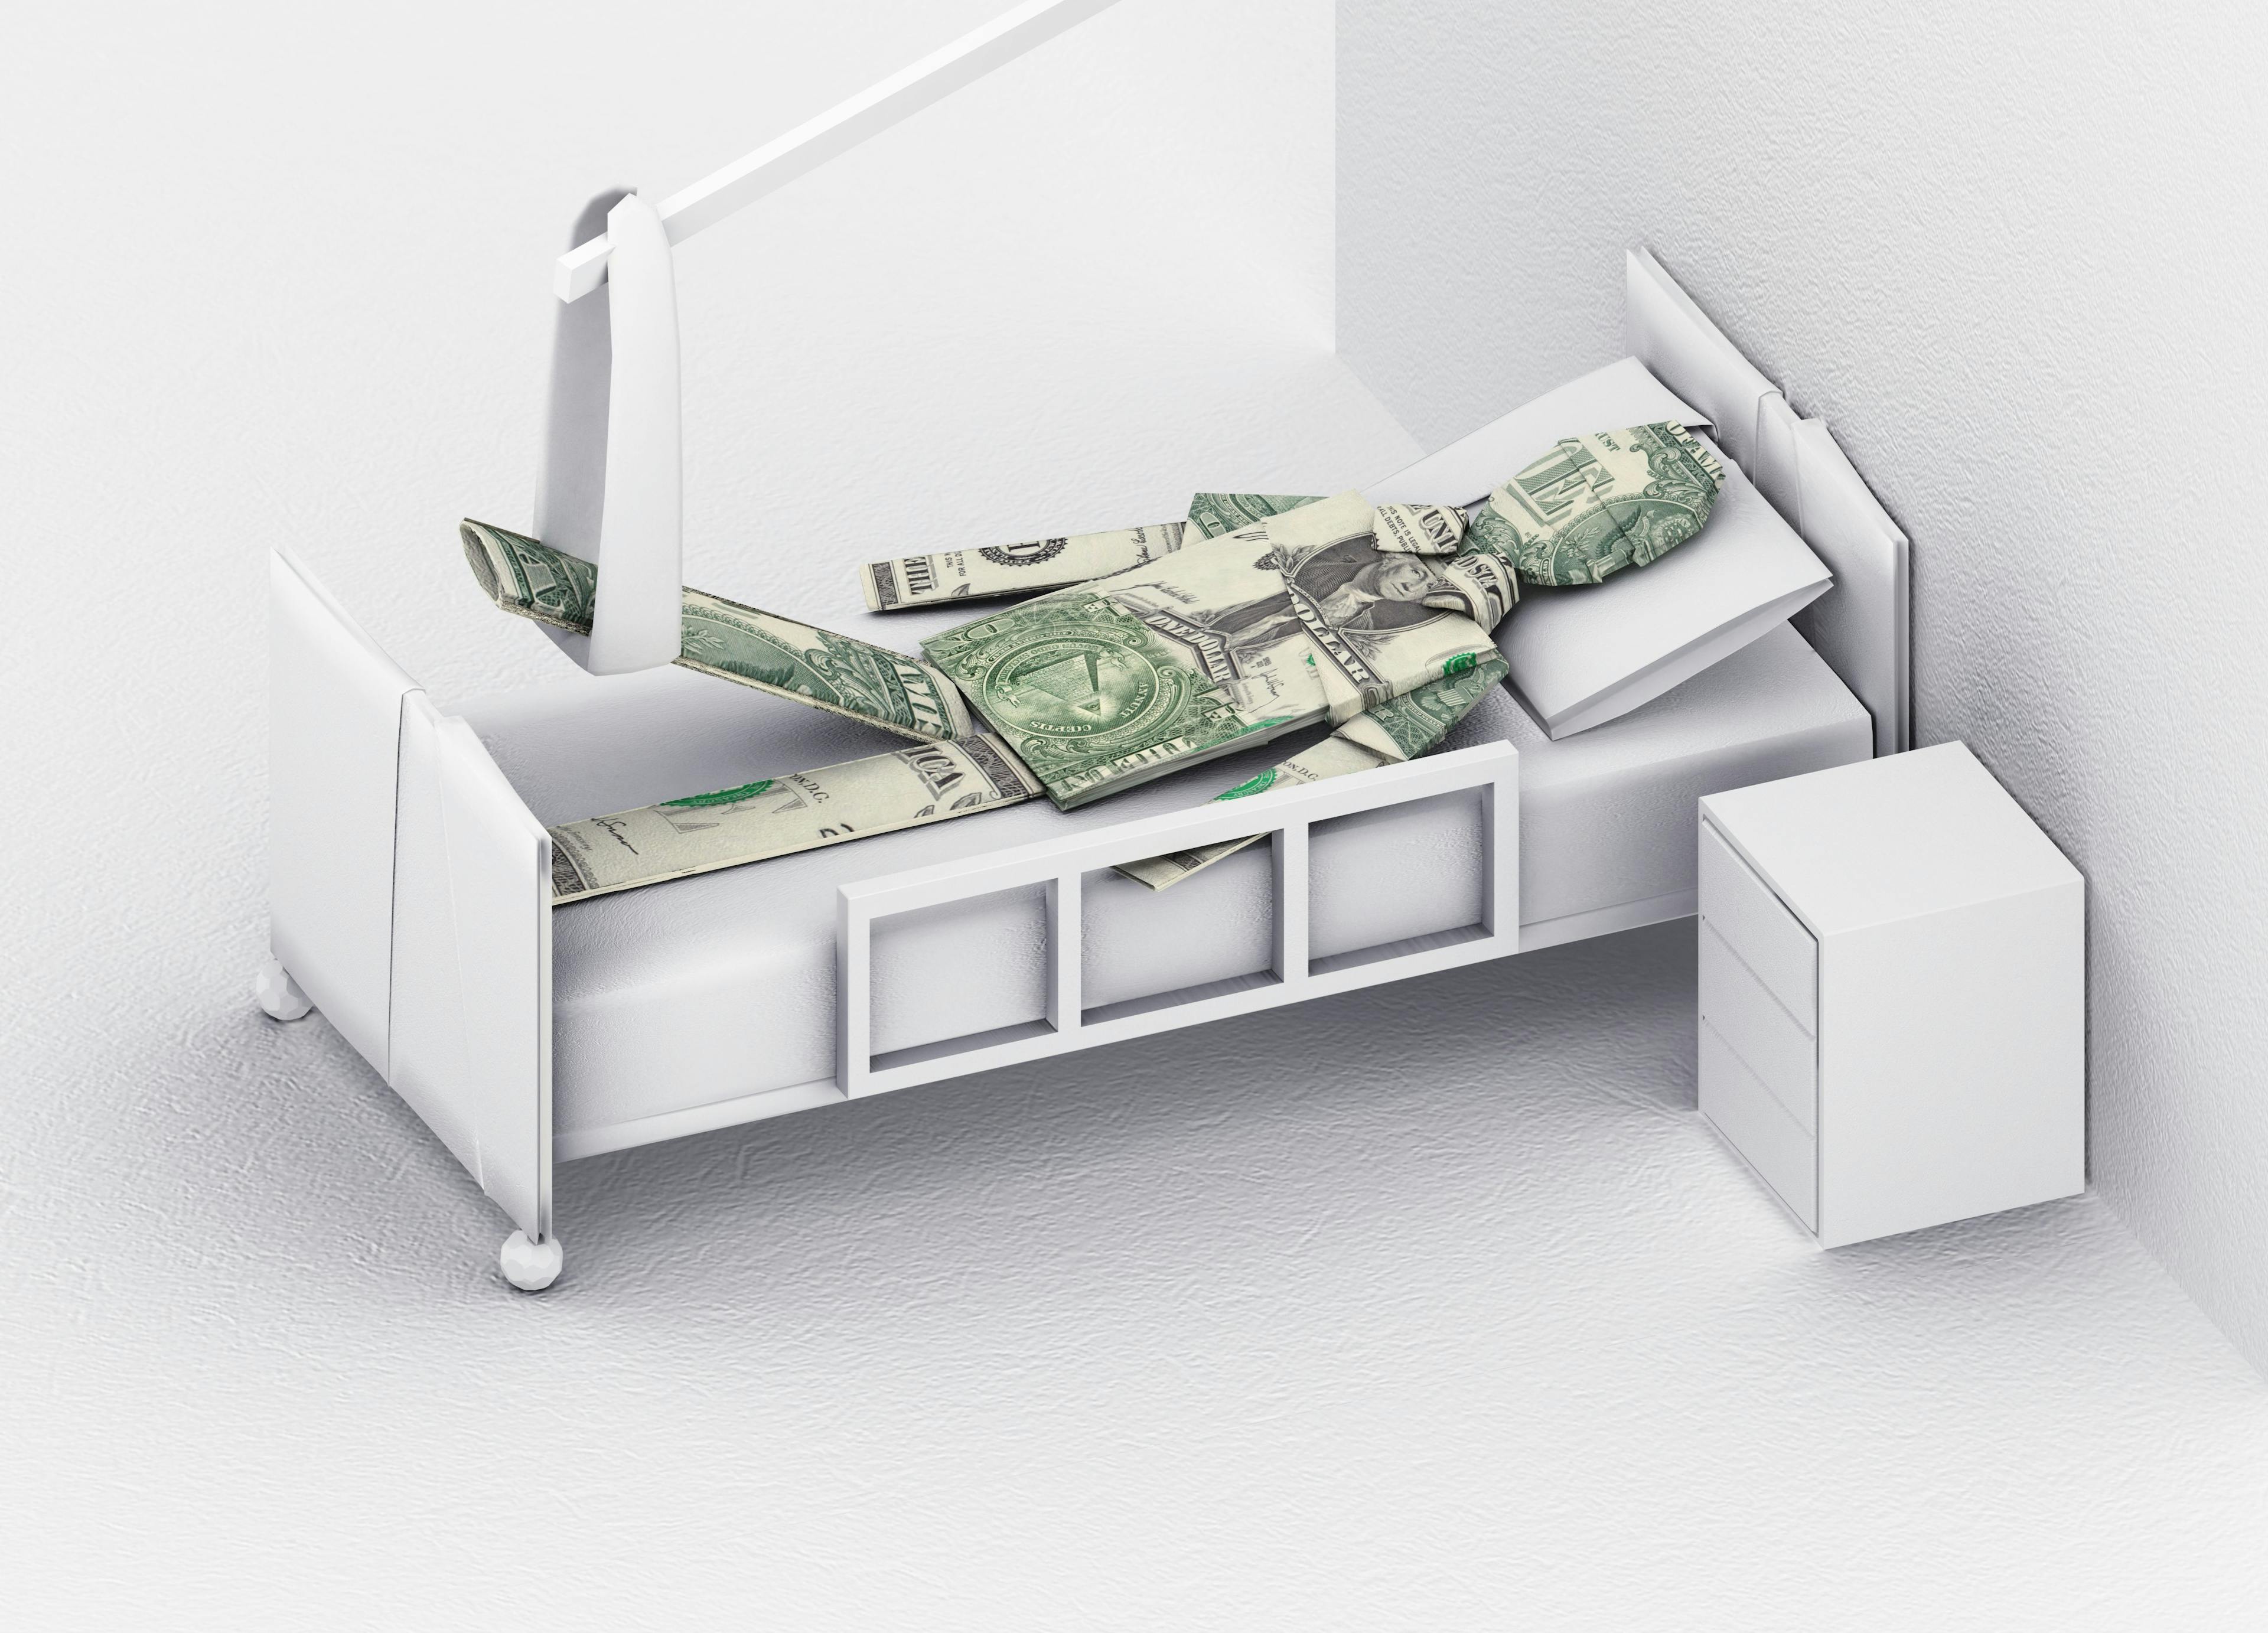 Private insurers paying hospitals more than double Medicare rates: ©KH Art: stock.adobe.com